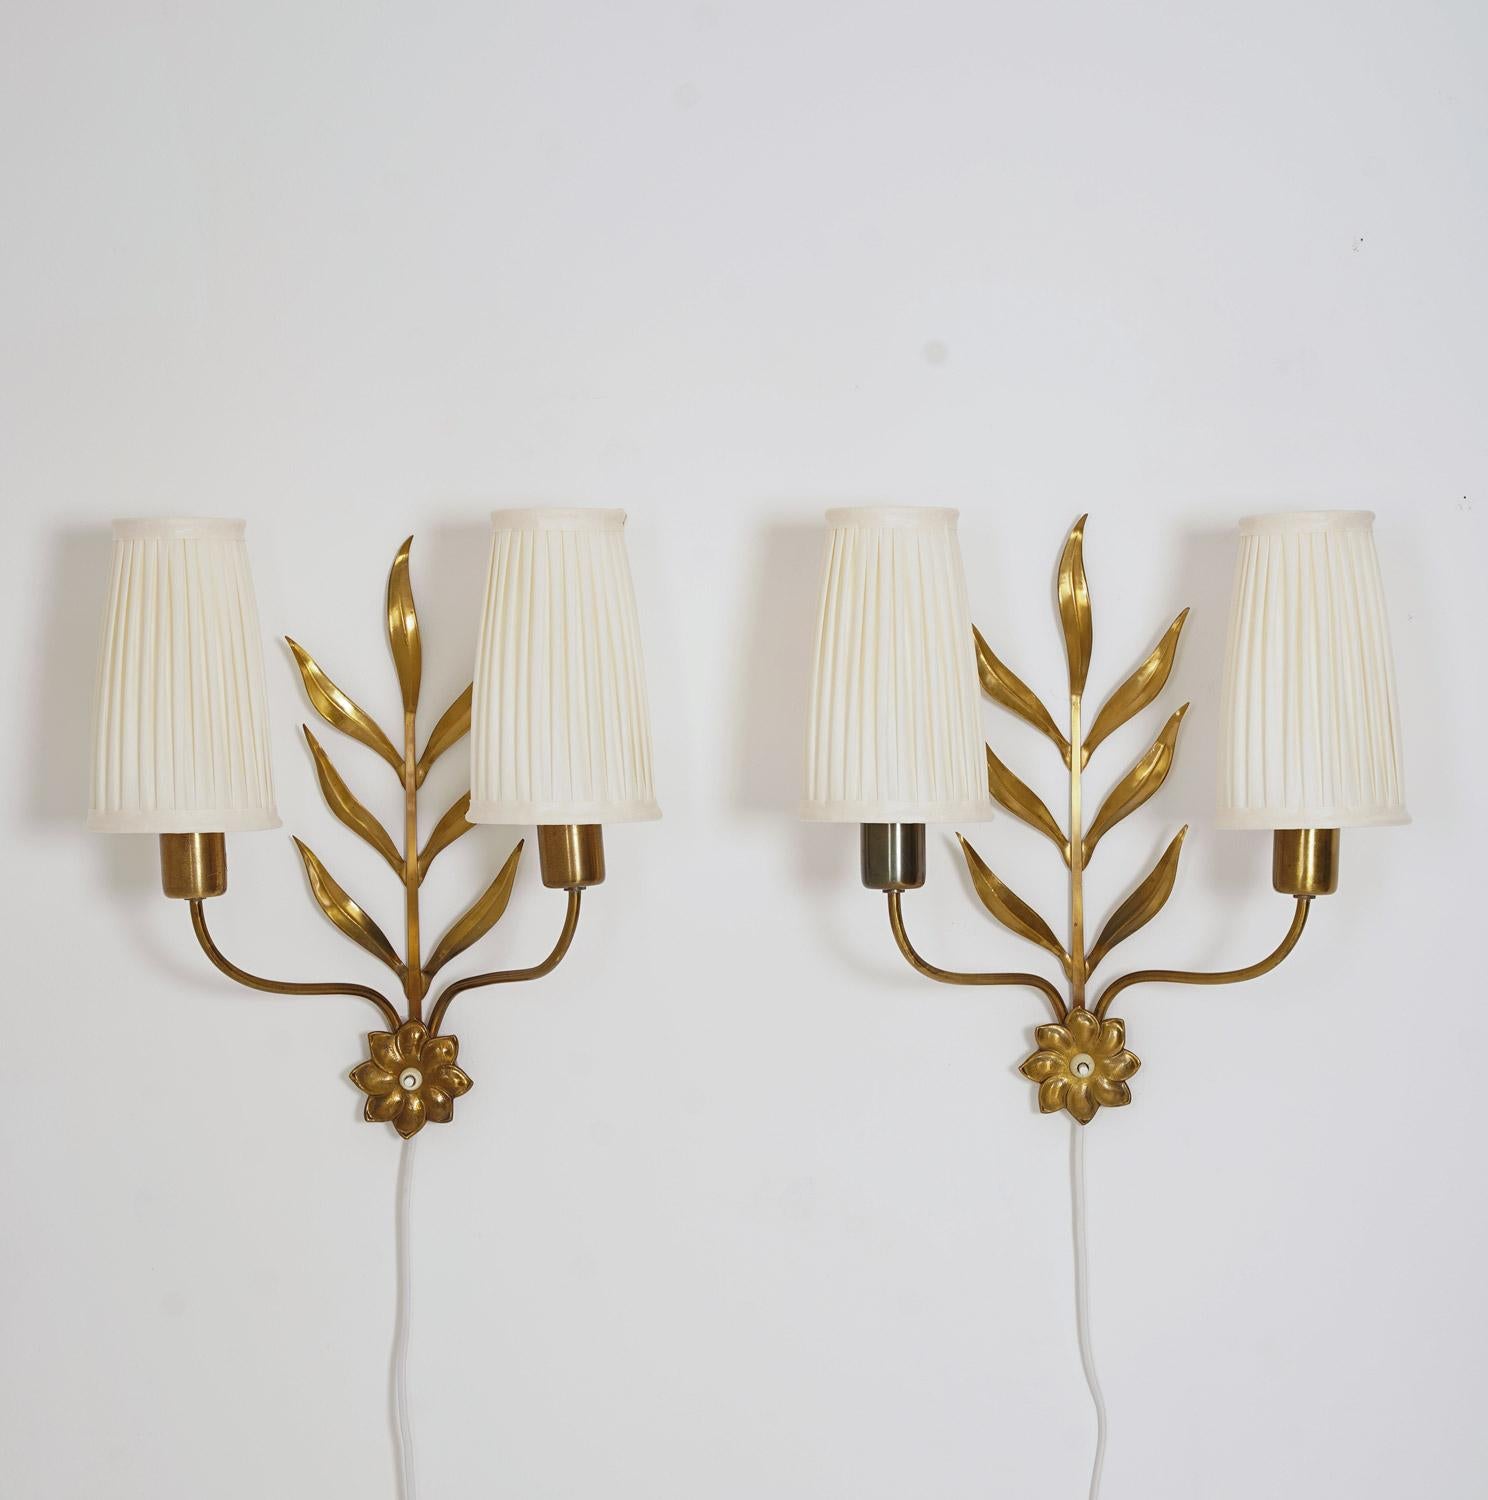 Charming pair of wall lamps, most likely produced in Sweden ca 1950.
The lamp is made of brass with floral ornaments and comes with pleated fabric shades.
Condition: Very good vintage condition with new hand-pleated shades.